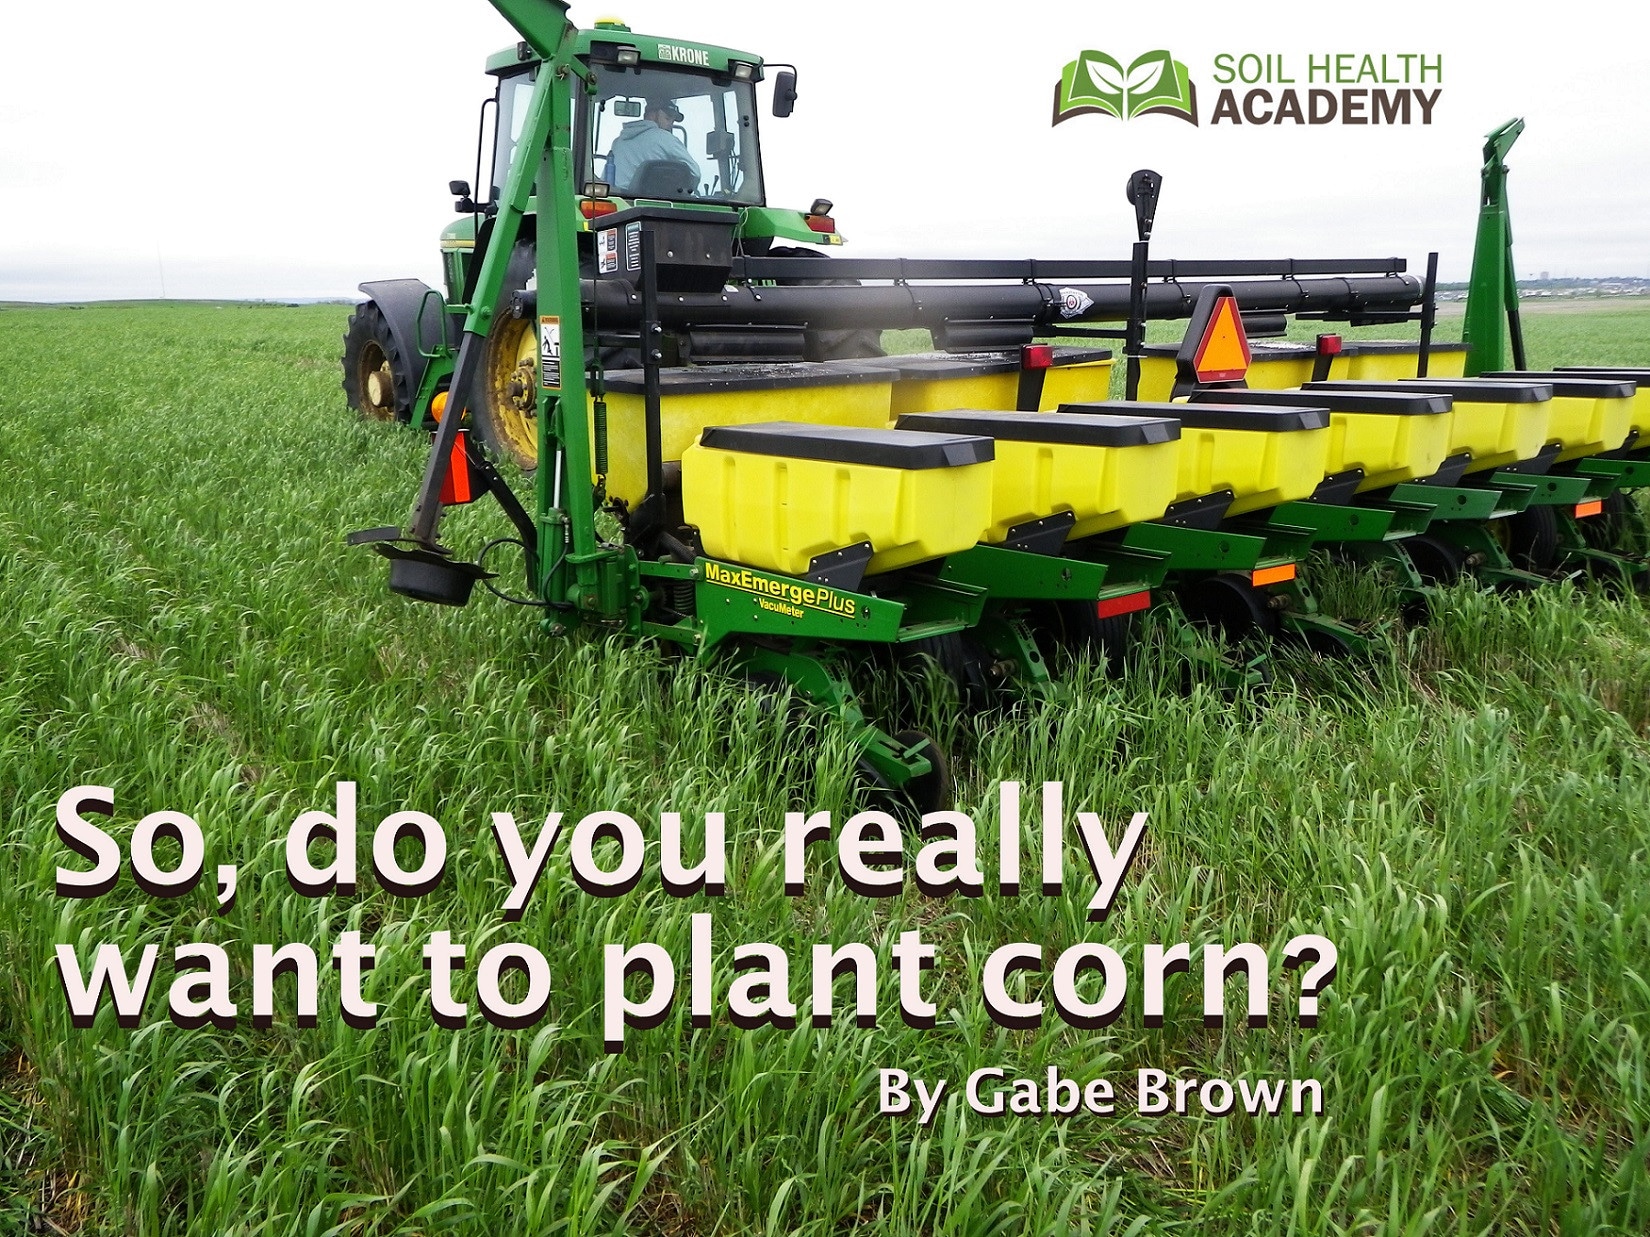 So do you really want to plant corn